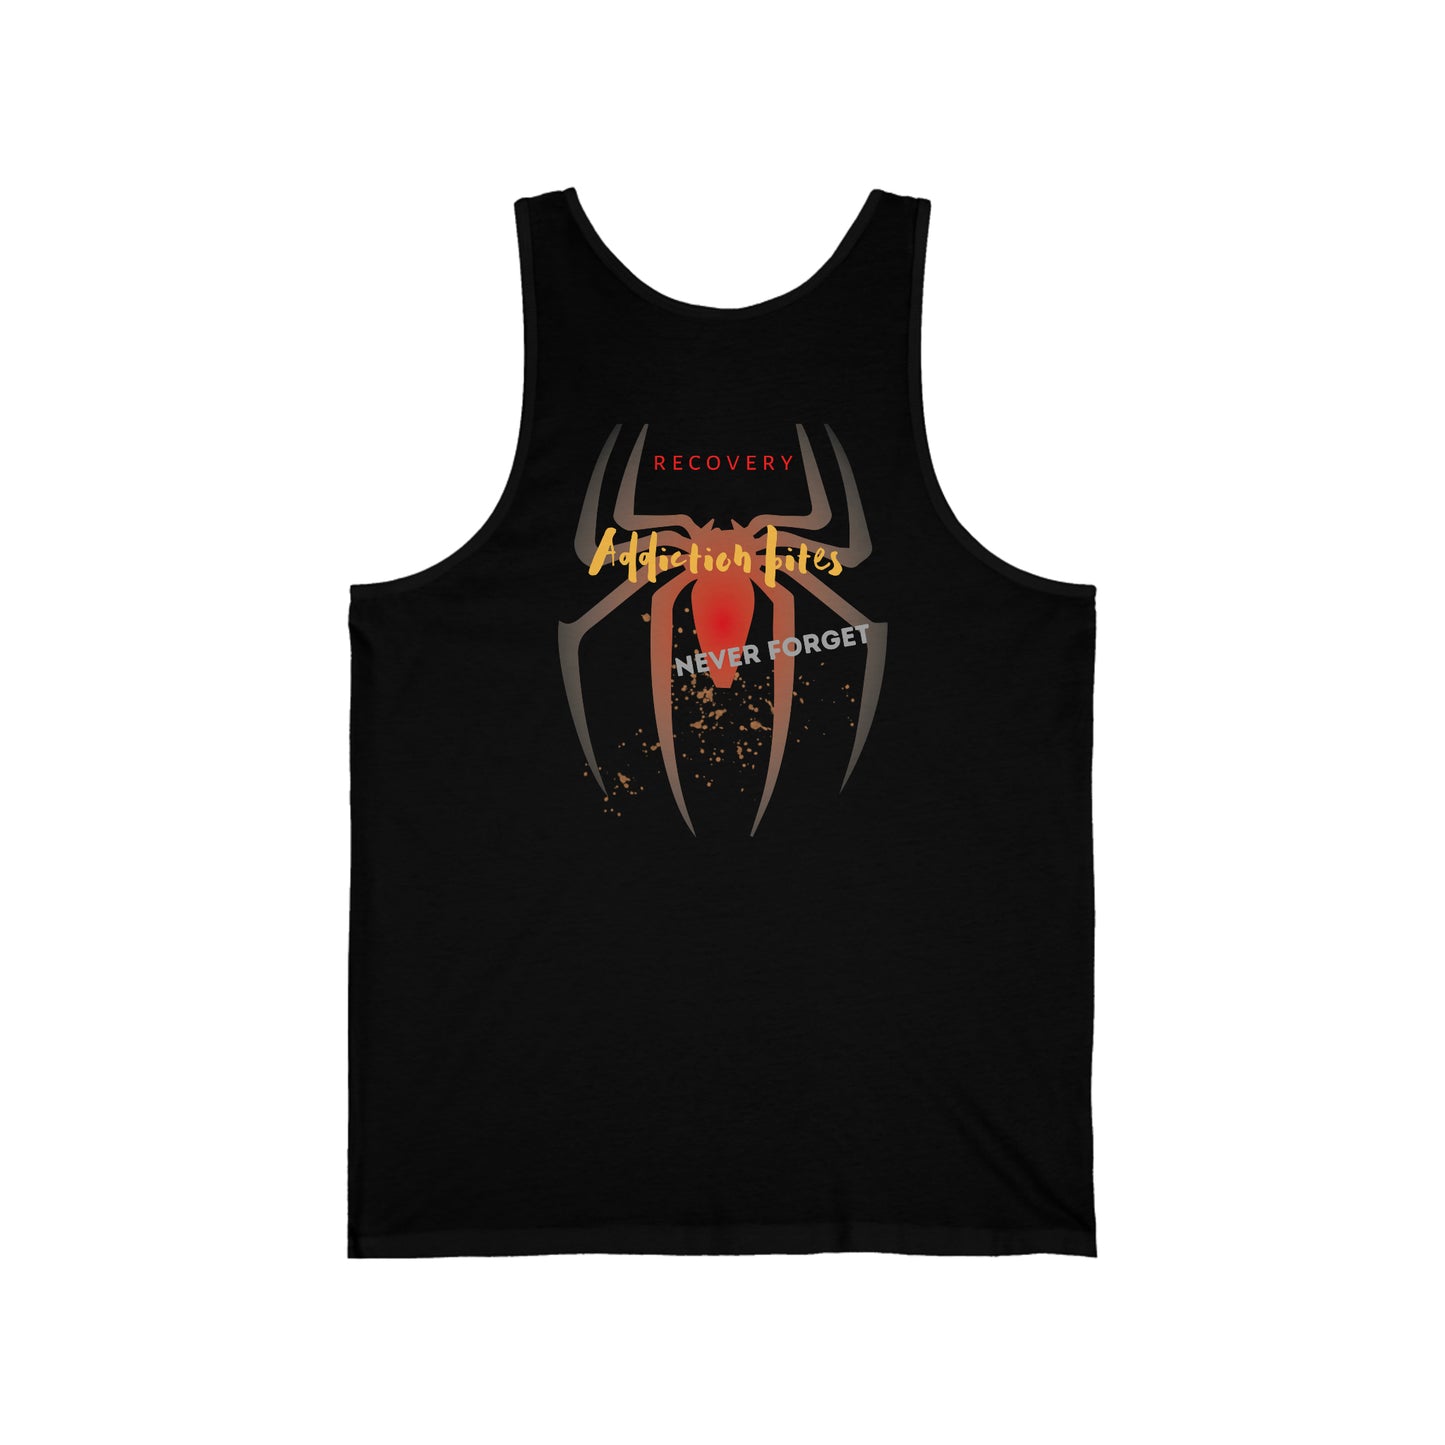 "Recover or Die" Two-Sided Unisex Tank